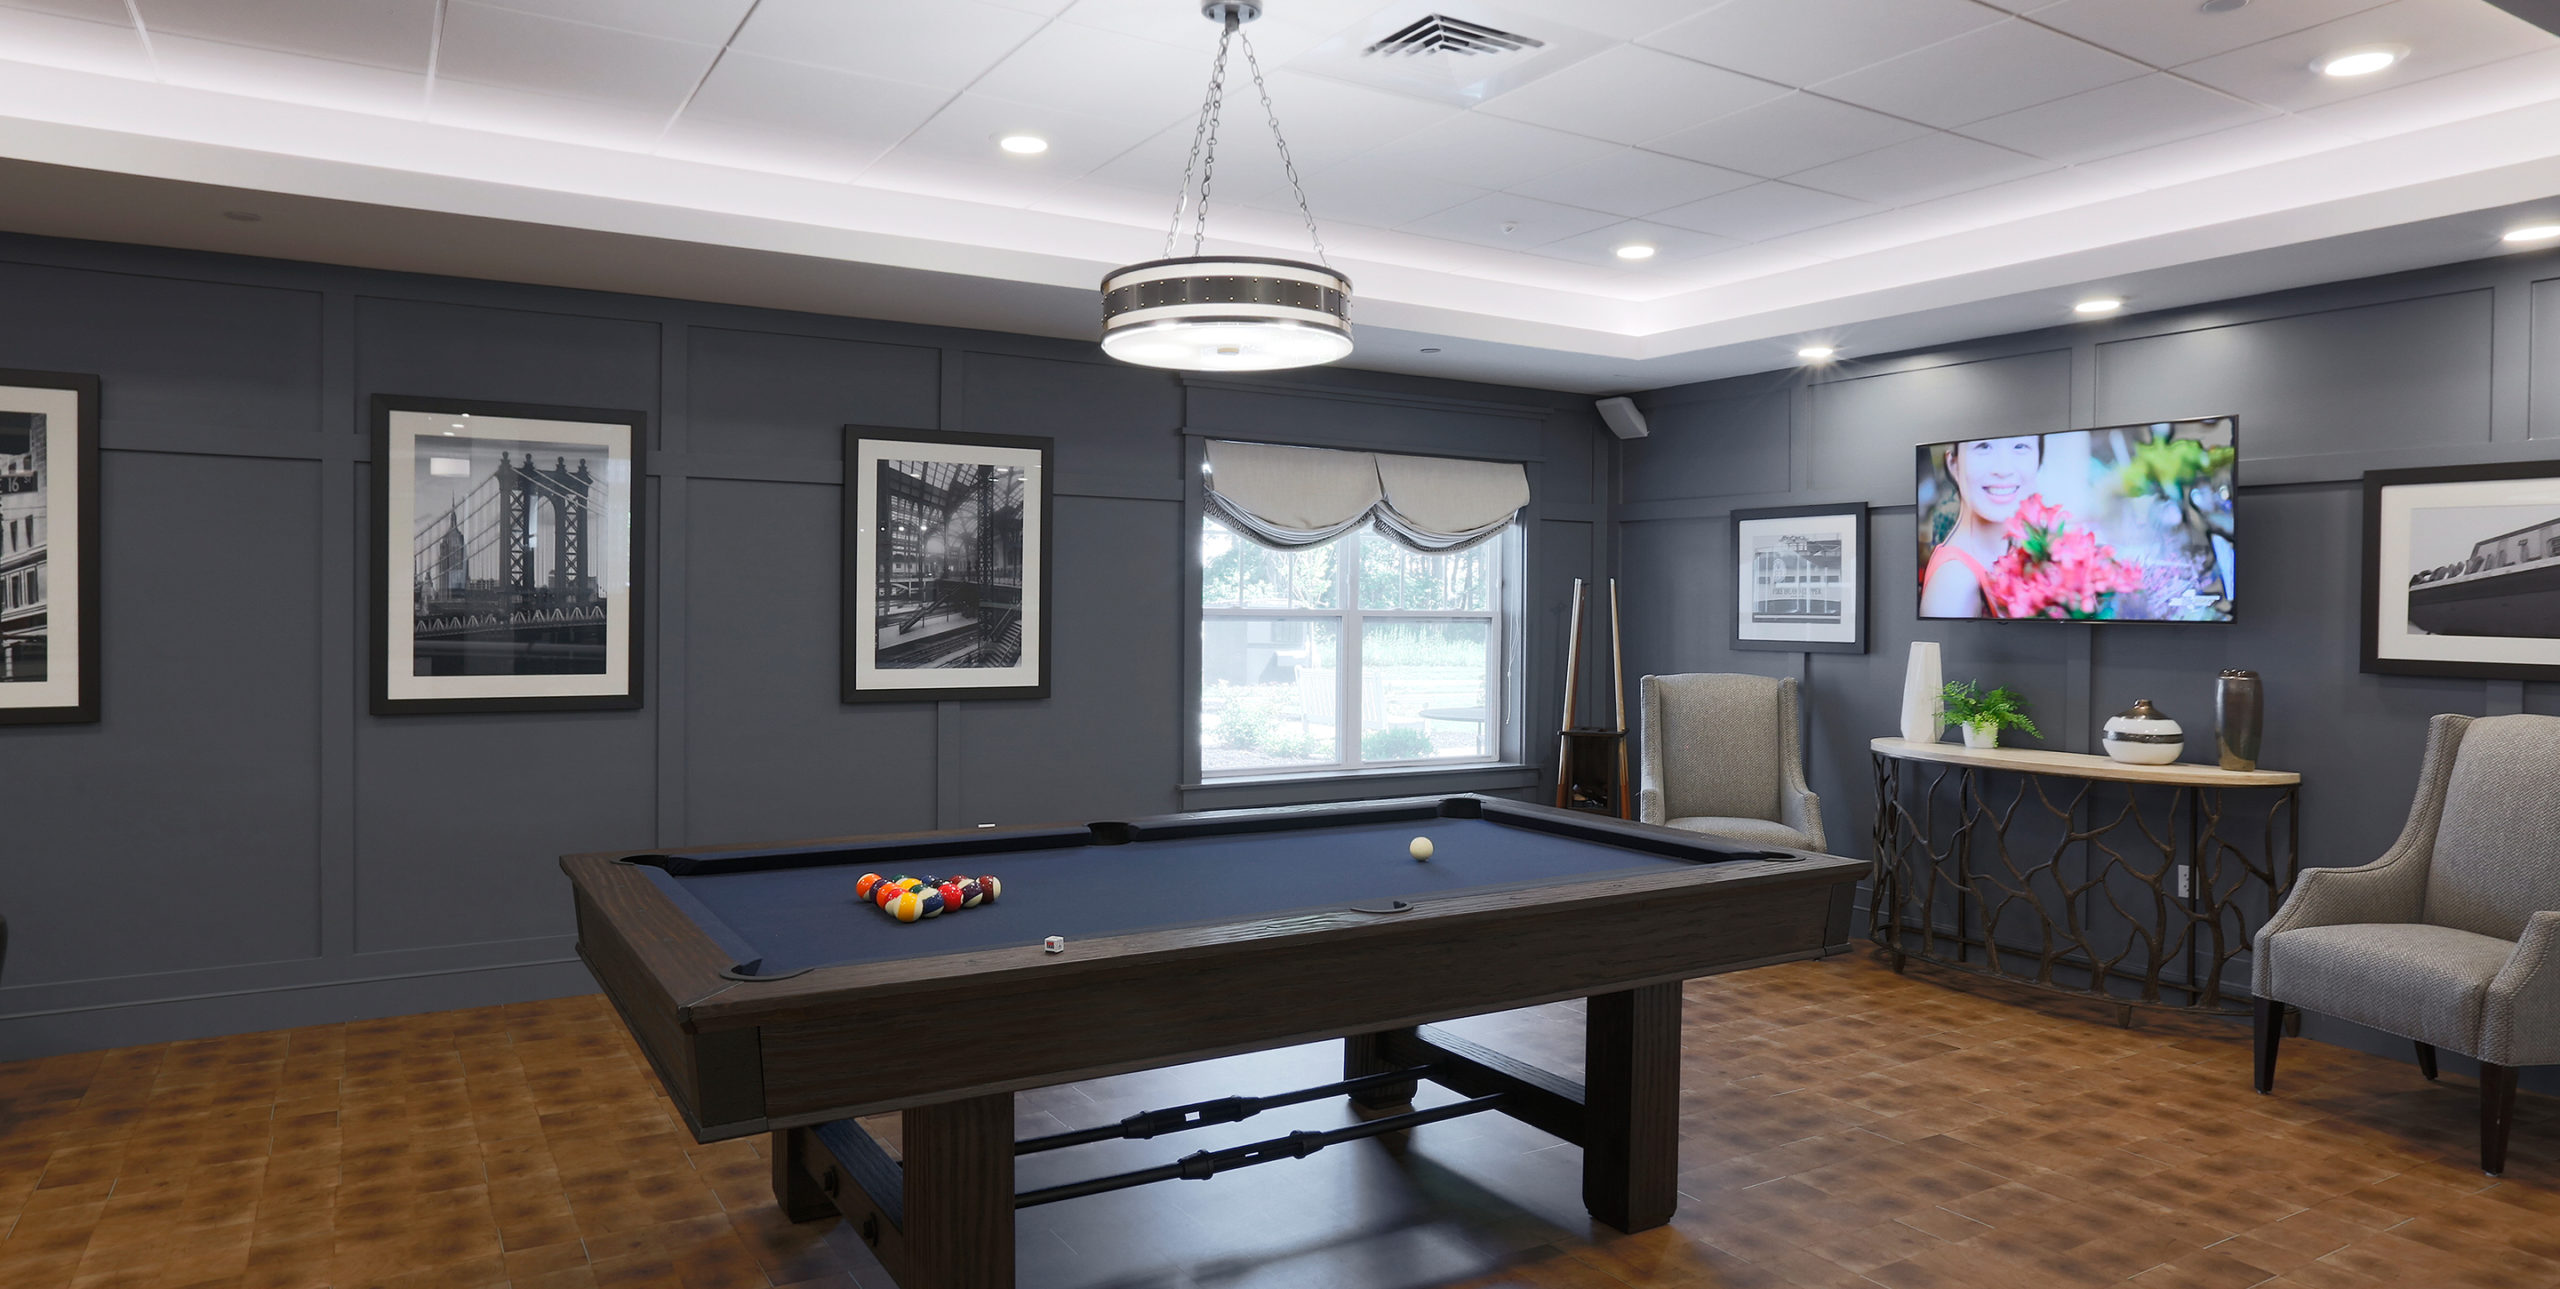 Pool table room at Brightview Senior Living in Sayville, NY